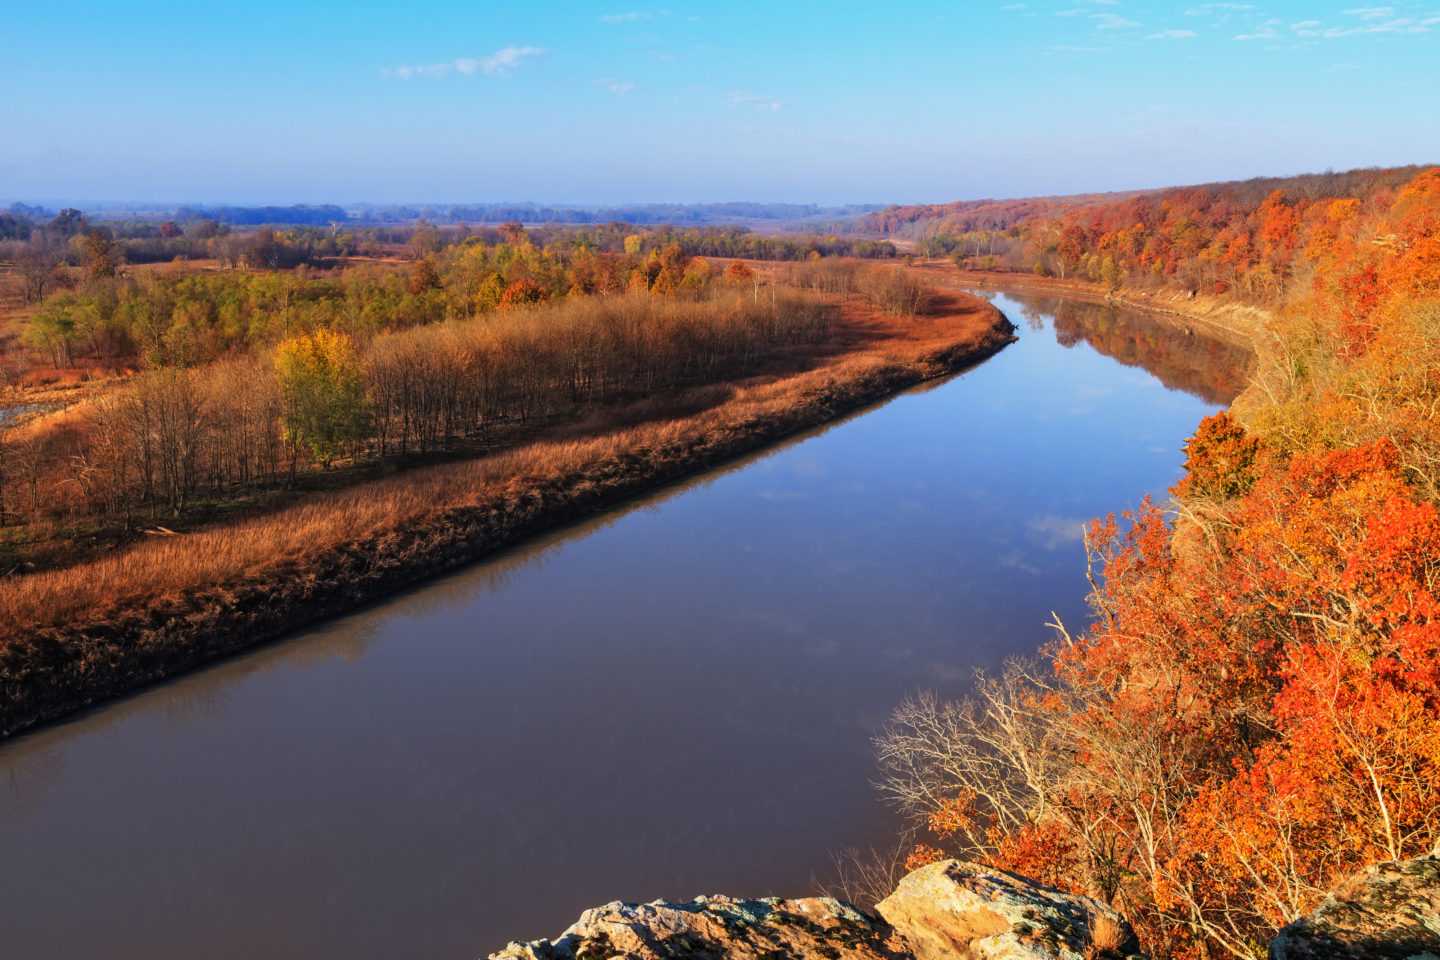 View of the Osage River during the autumn season. It is located in the Lake of the Ozarks area of Missouri.